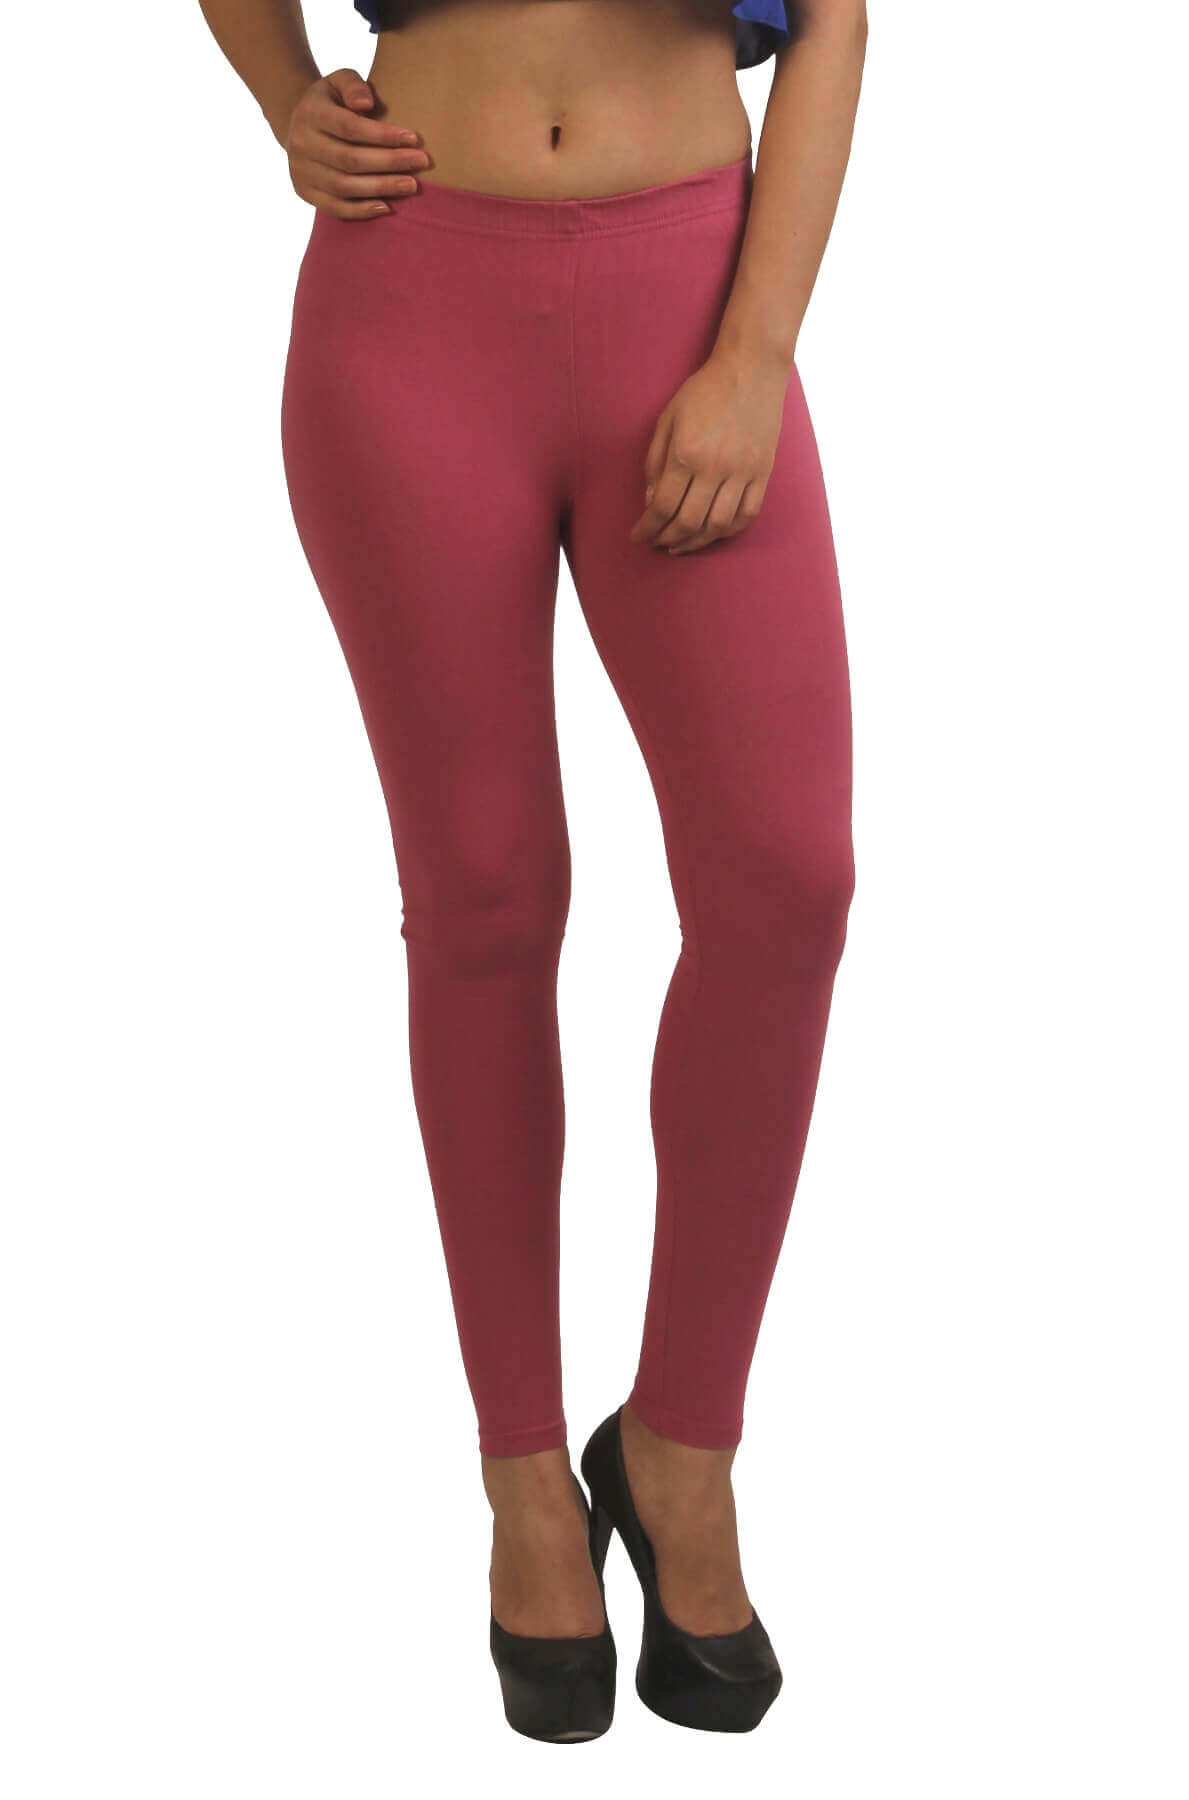 Buy Women Maroon Rib Ankle Length ACTIVE Tights Online at Sassafras